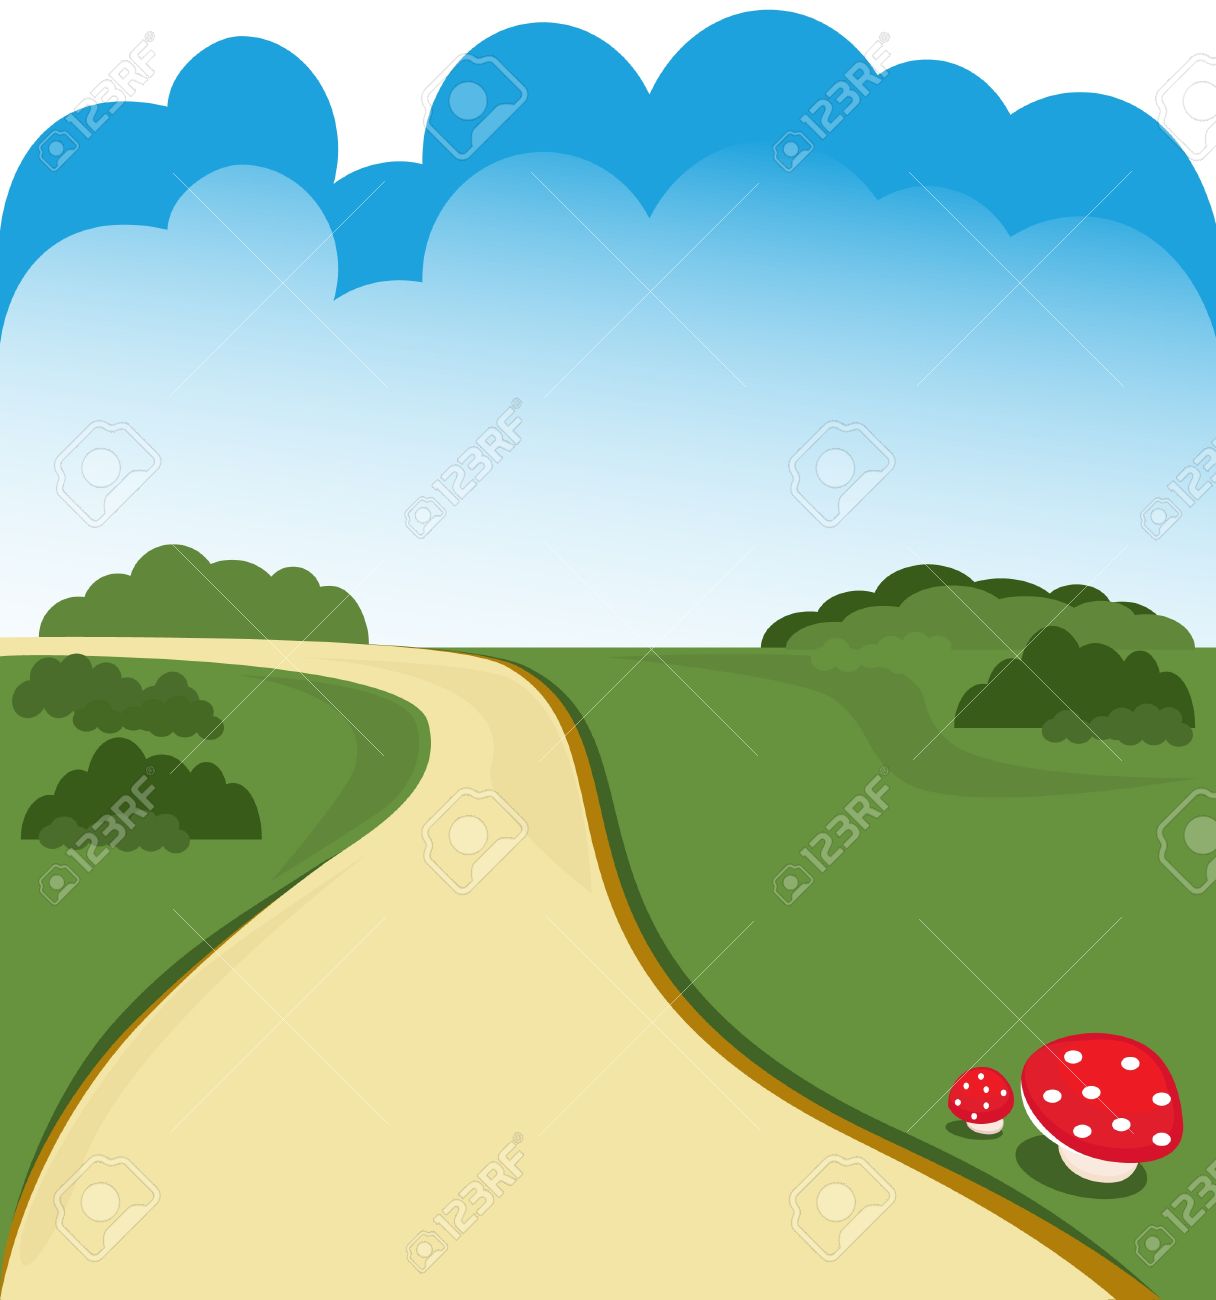 Highway clipart rural road. Country station 